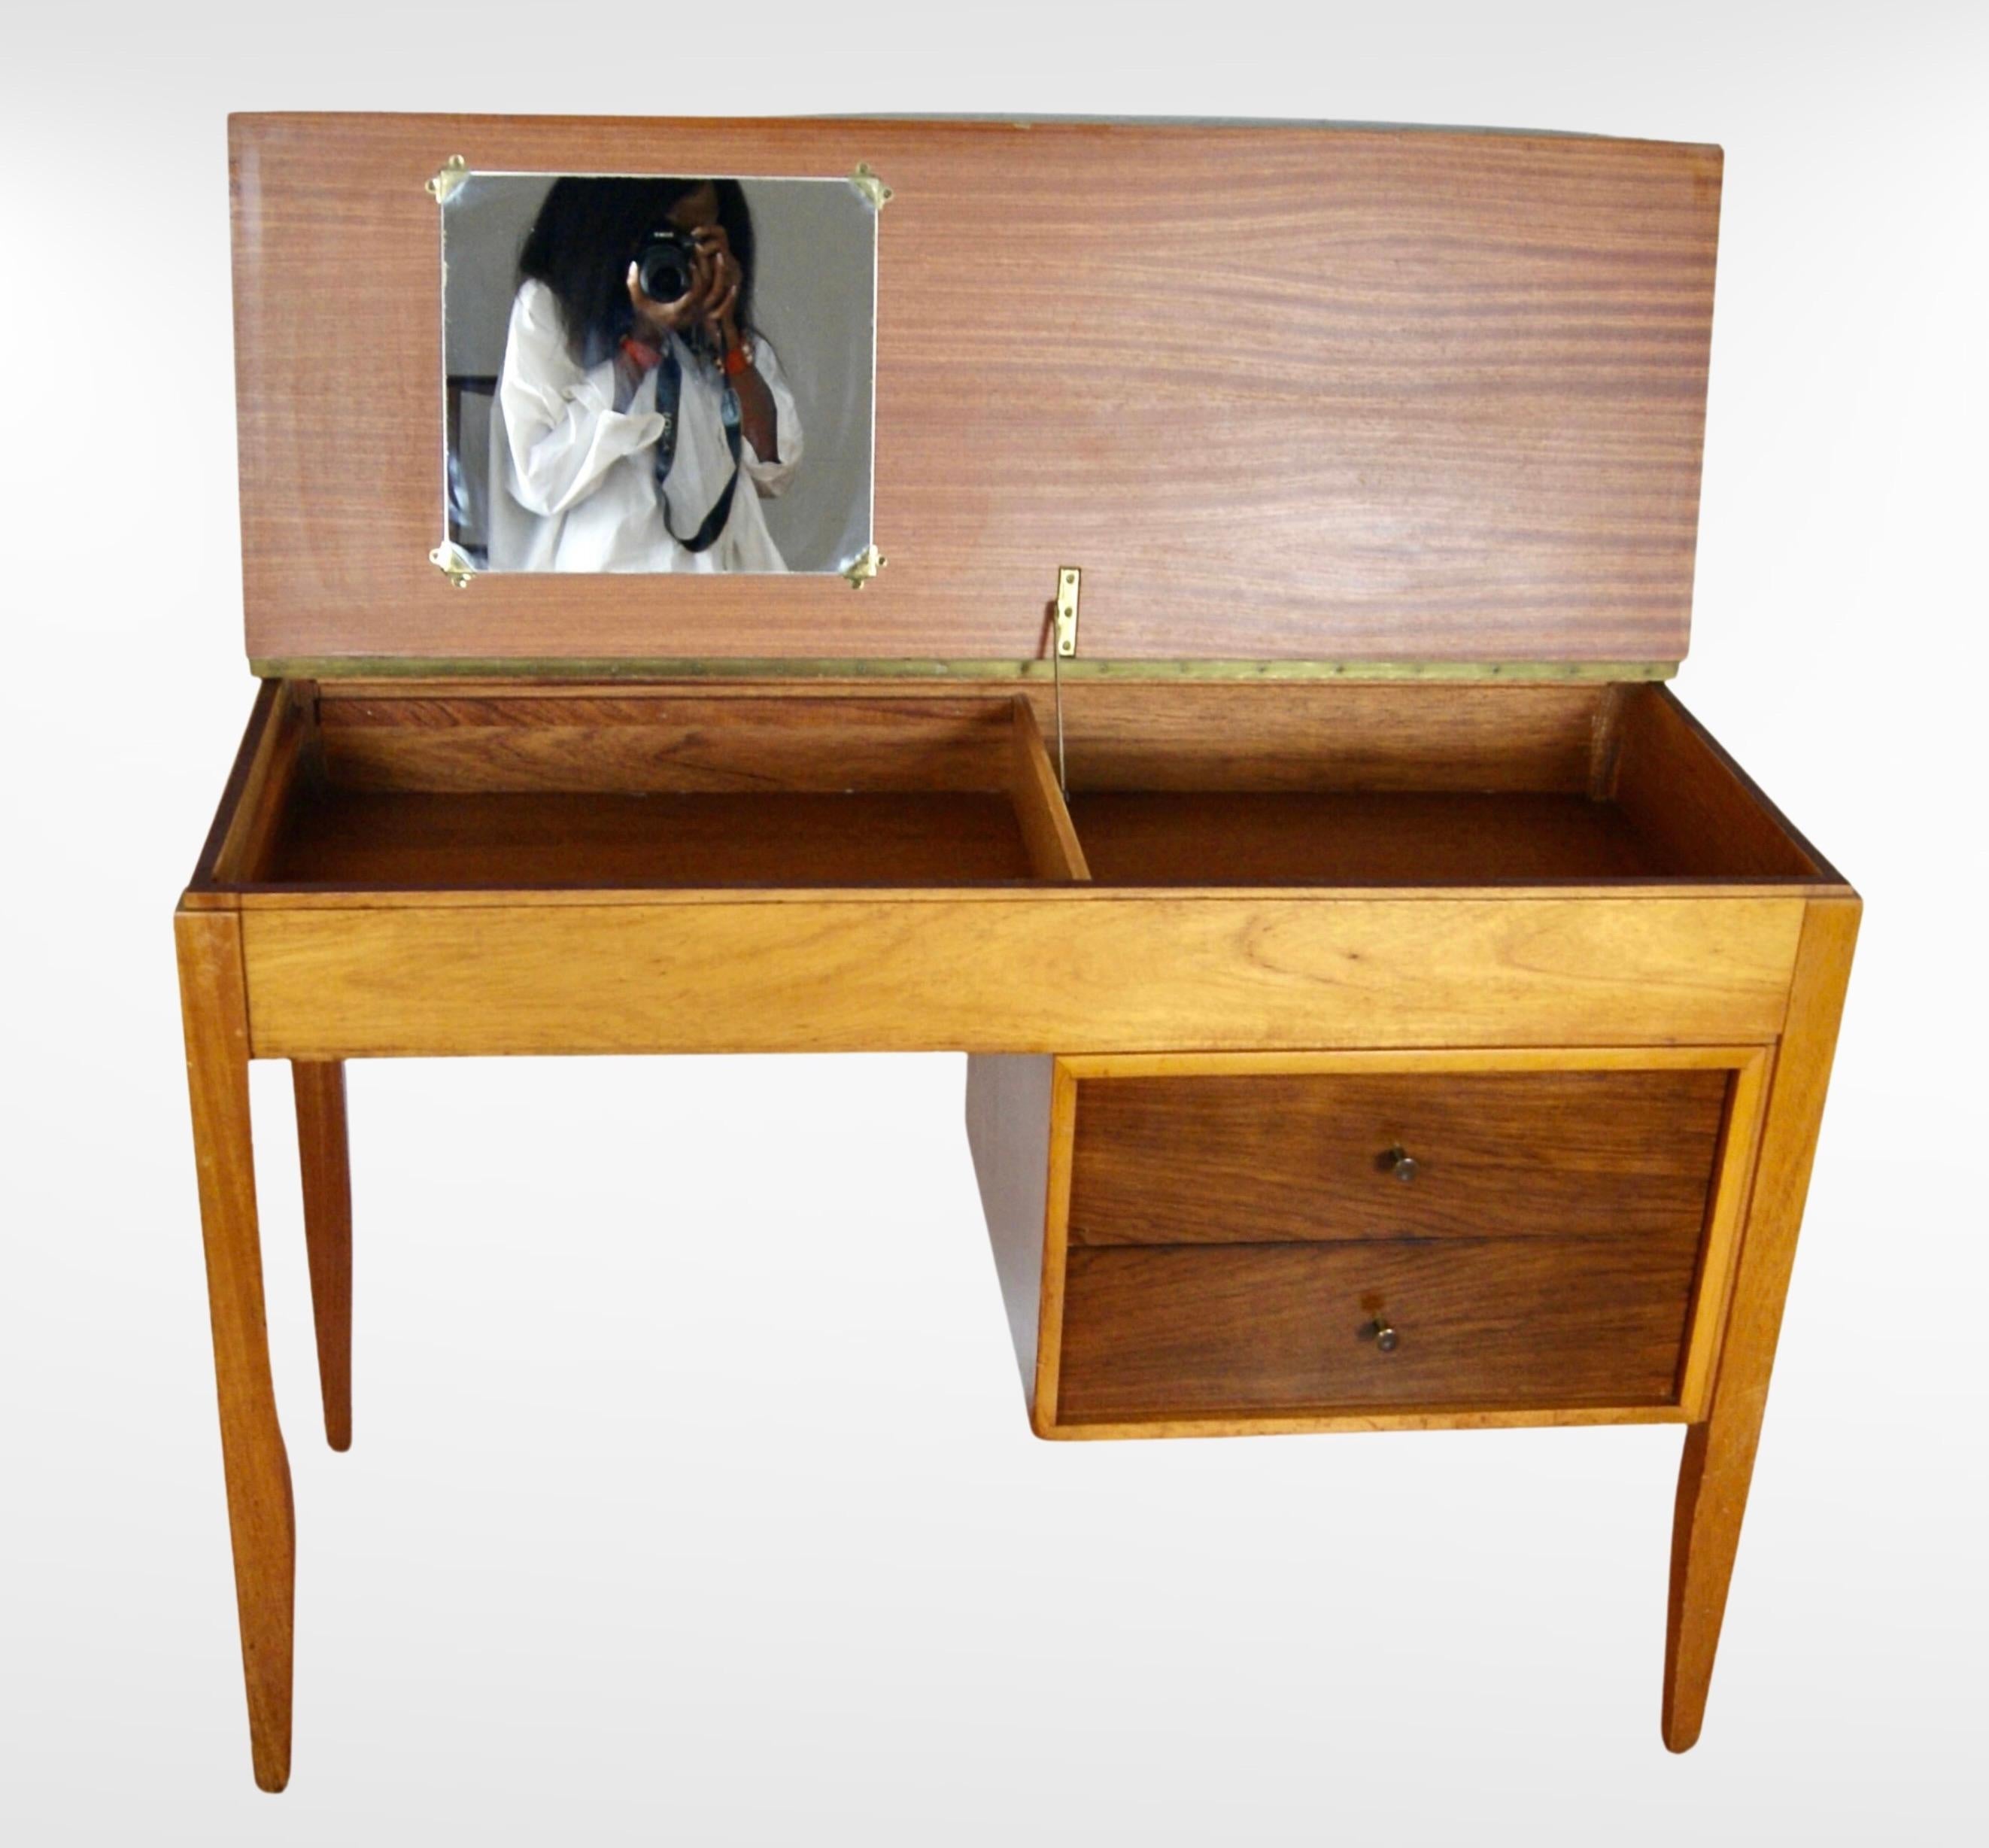 Retro Leather Top Desk/Dresser with Mirrored Interior Peter Hayward for UNIFLEX For Sale 5